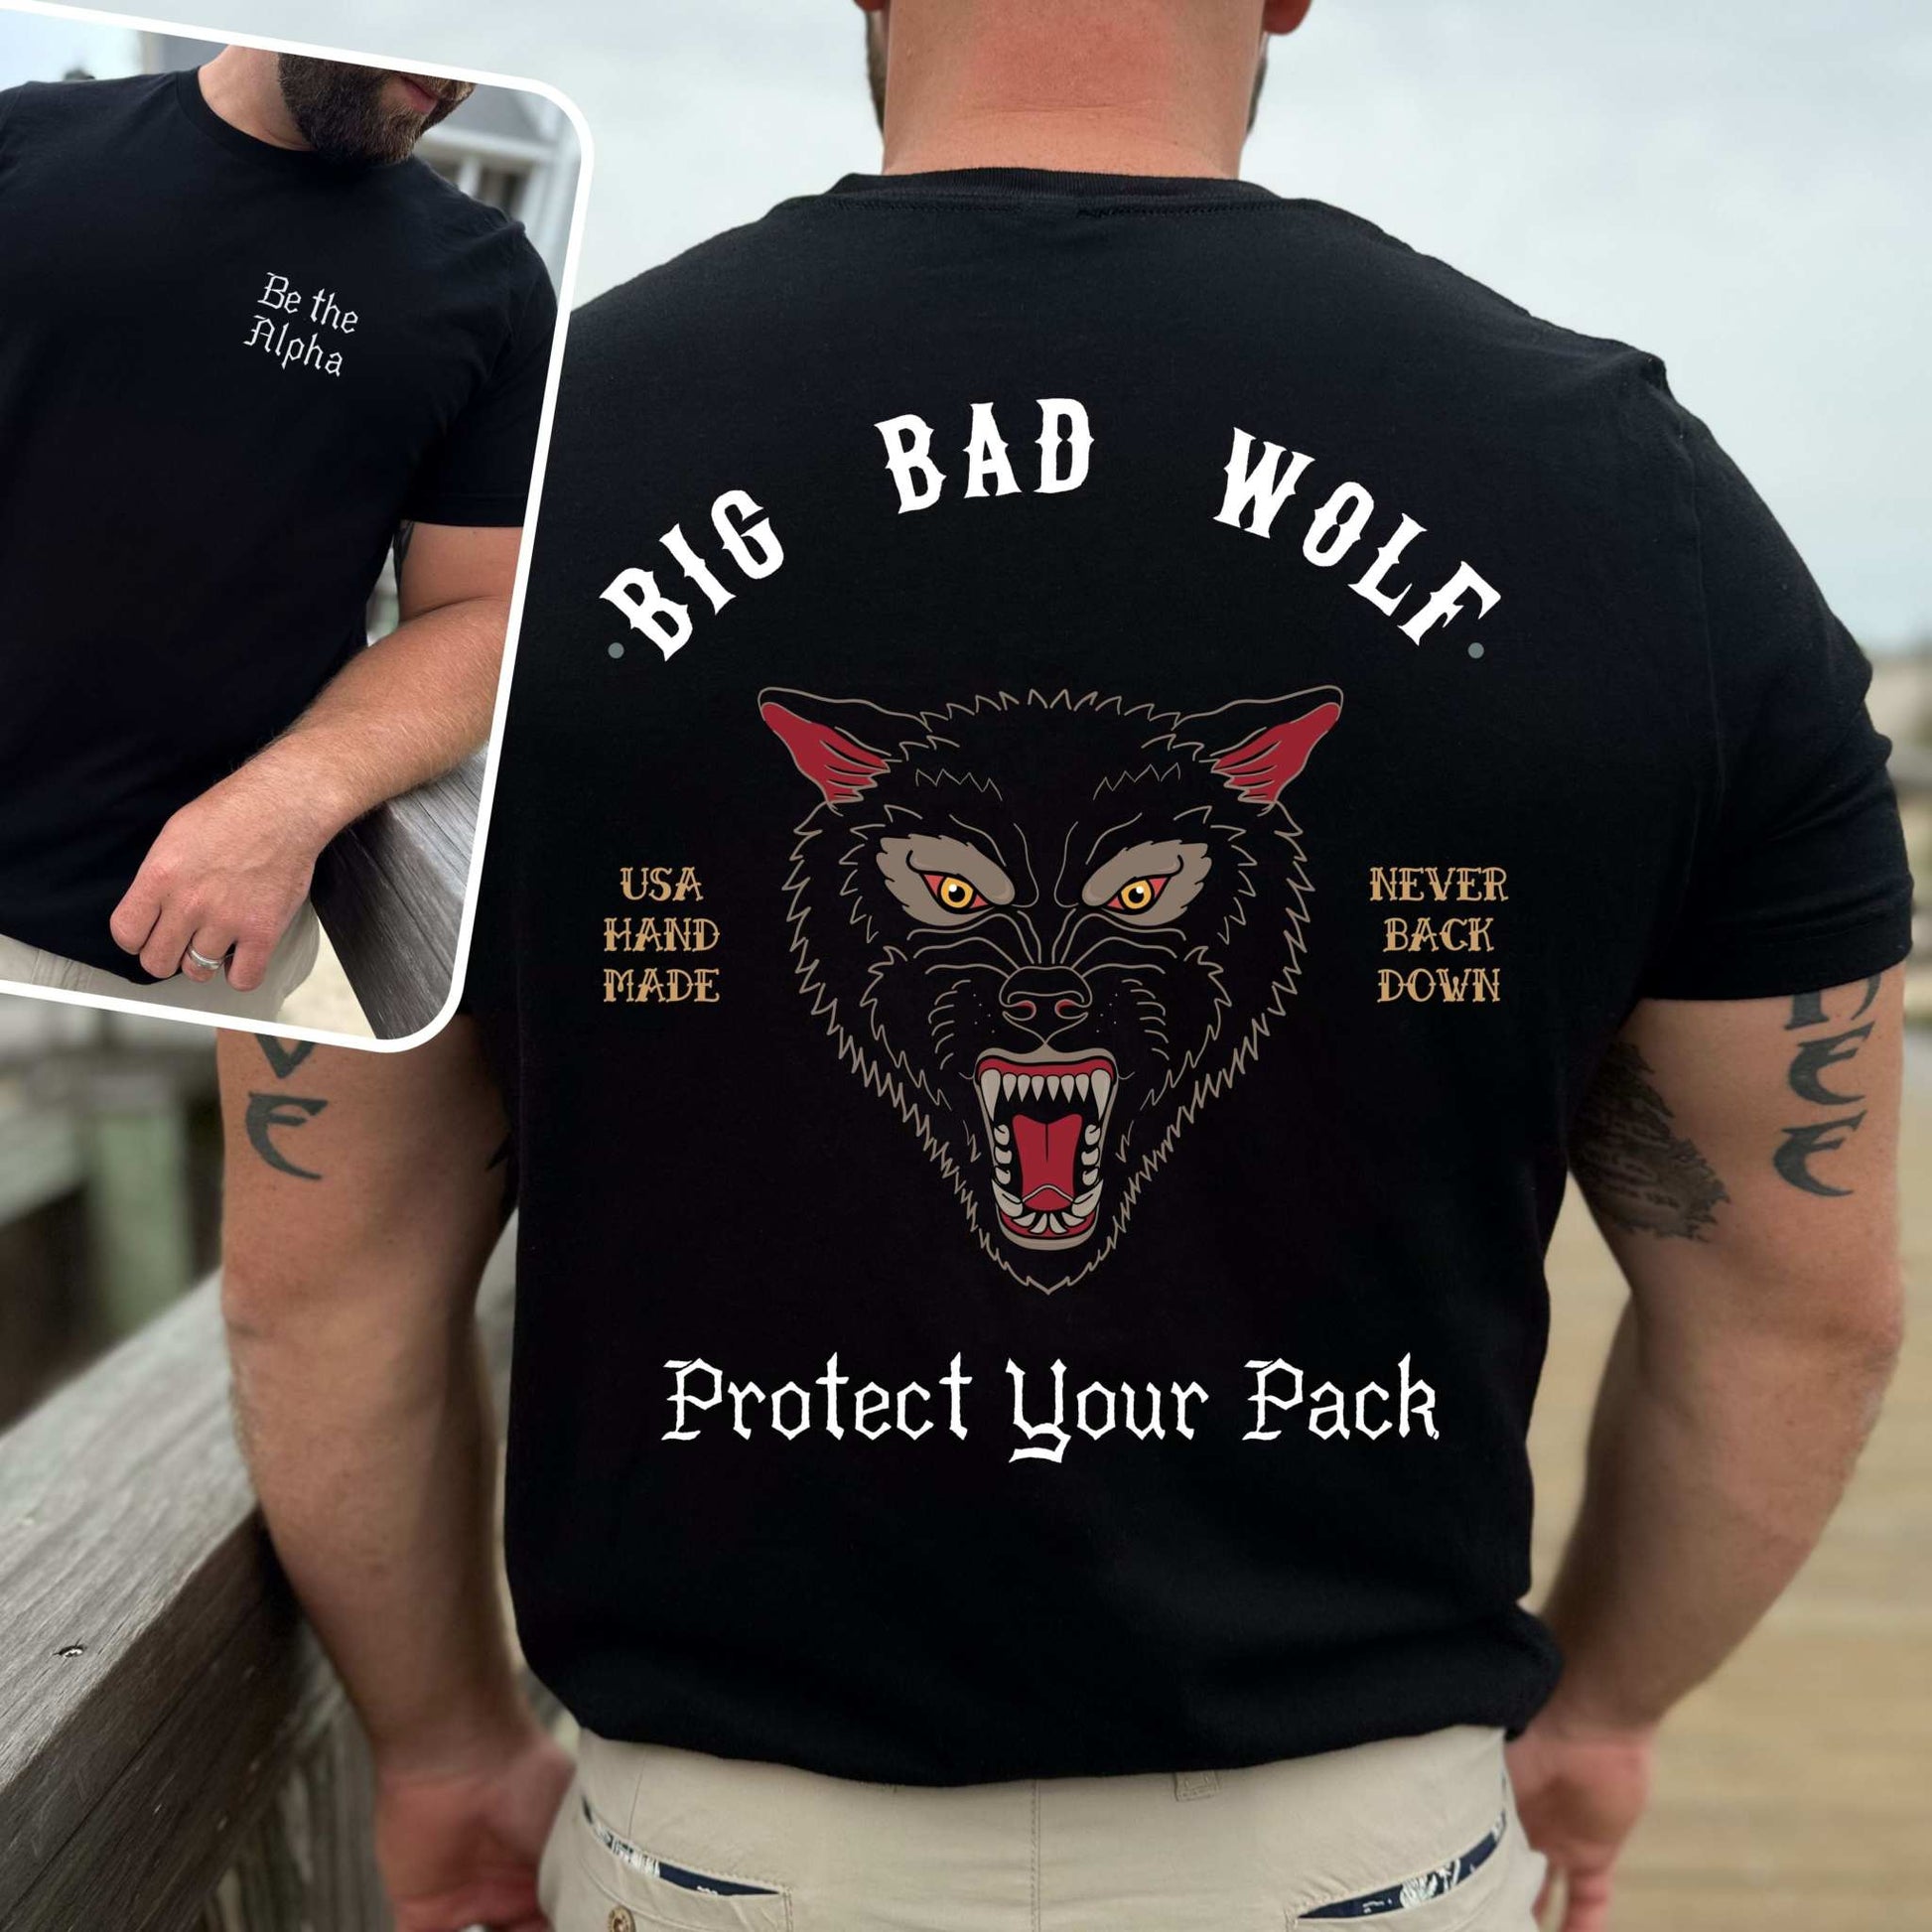 Big Bad Wolf Men'Wolfe Paw DesignsBig Bad Wolf Men'For alpha dads!
Be the Alpha Men's Tee
Protect your Pack.
100% combed, ring-spun cotton (fiber content may vary for different colors)Light fabricPremium fitRuns biggBig Bad Wolf  Men's Cotton Crew Tee